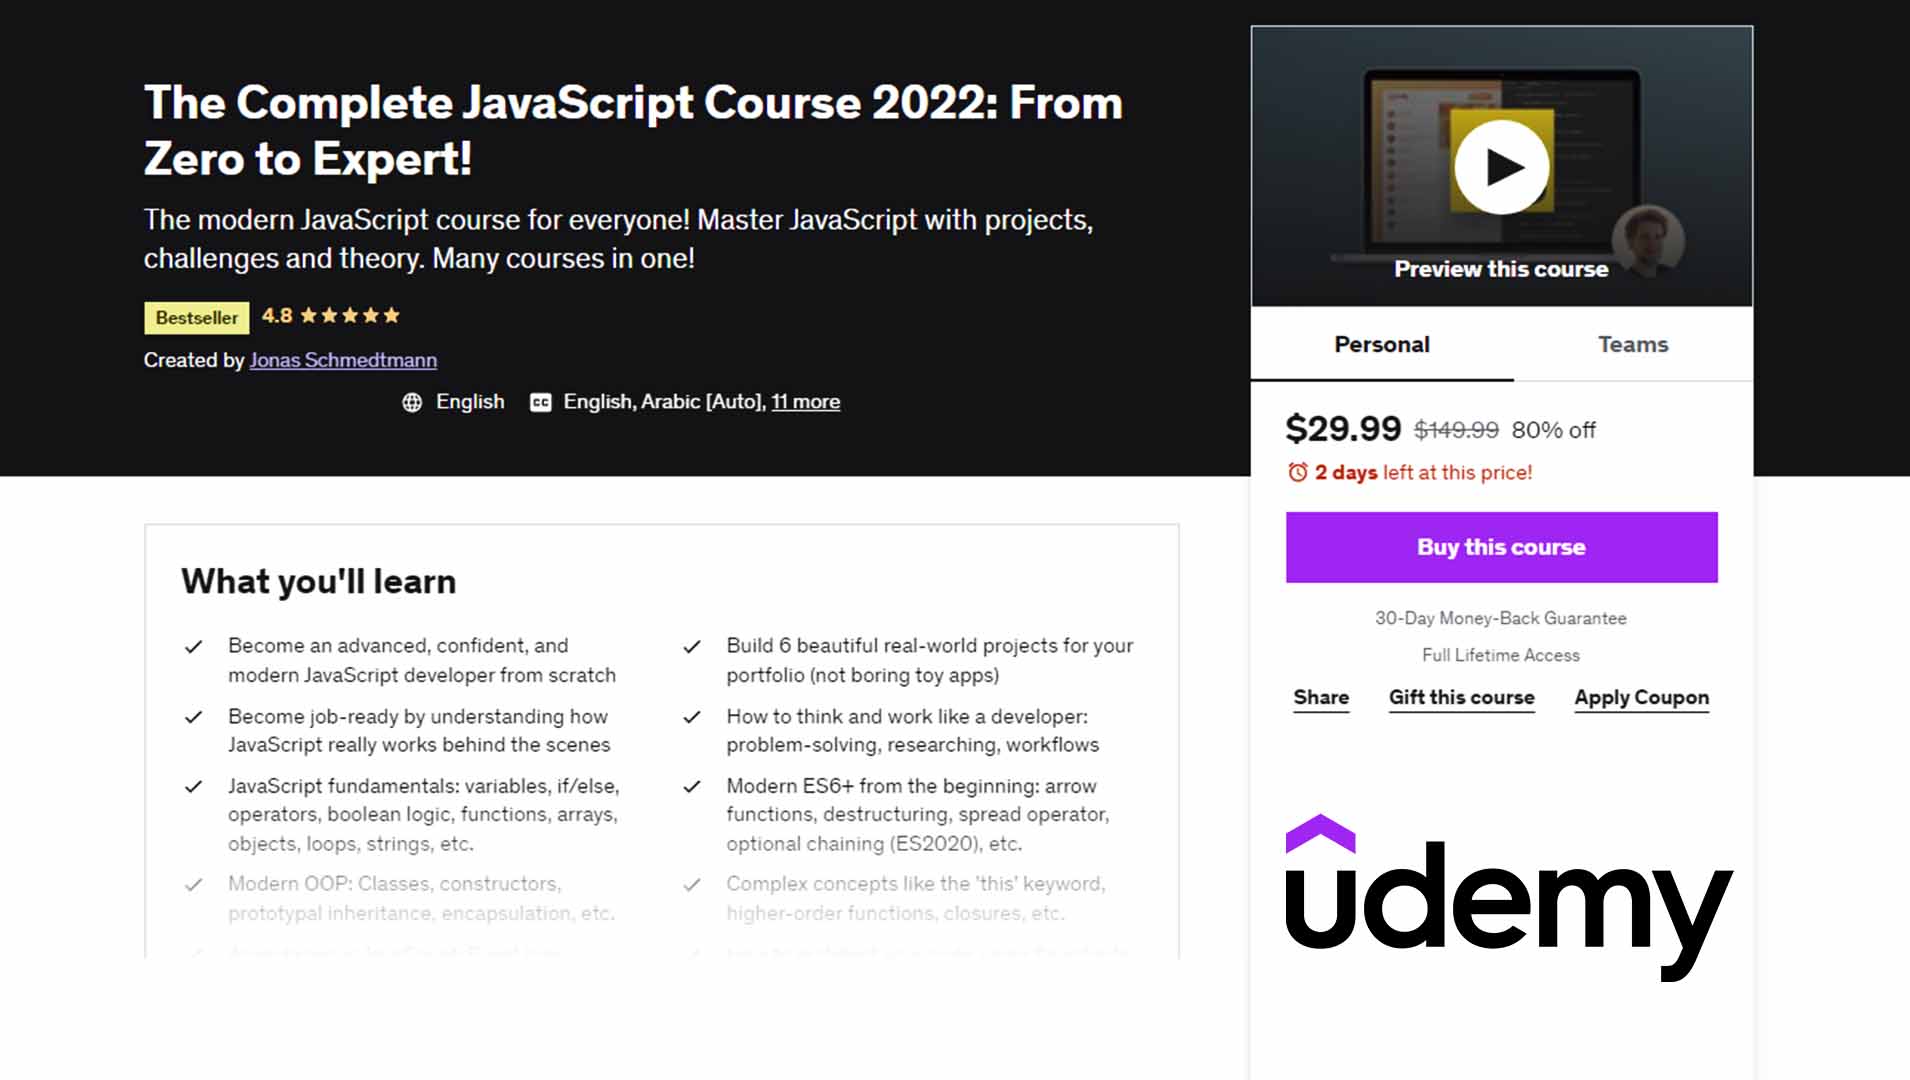  The Complete JavaScript Course: Build a Real-World Project